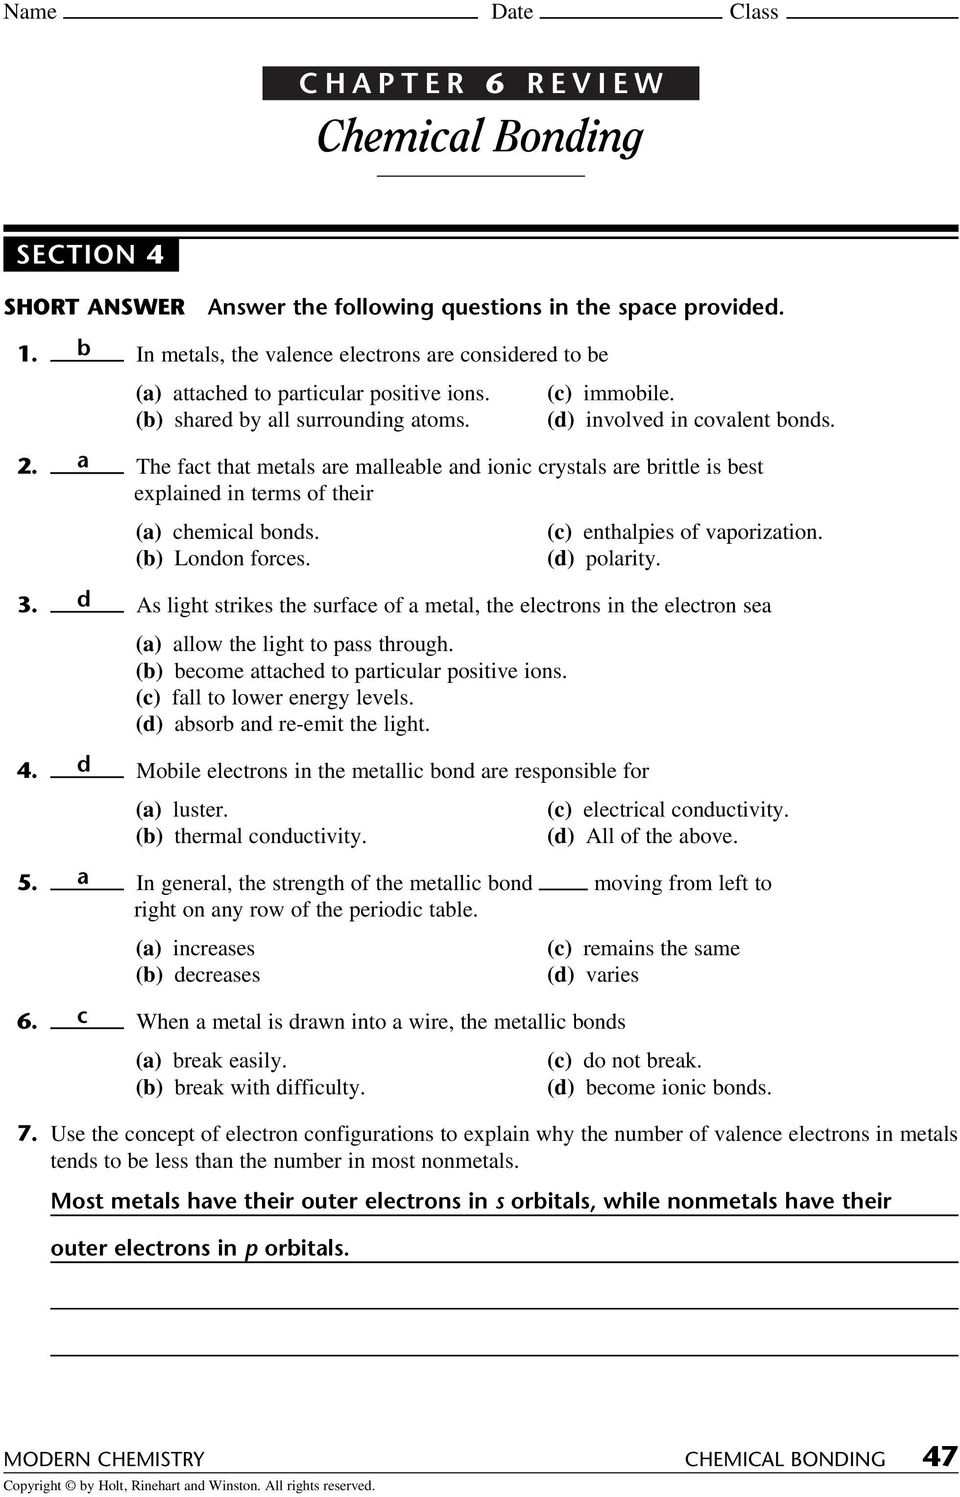 CHAPTER 21 REVIEW. Chemical Bonding. Answer the following questions For Chemical Bonding Worksheet Answers